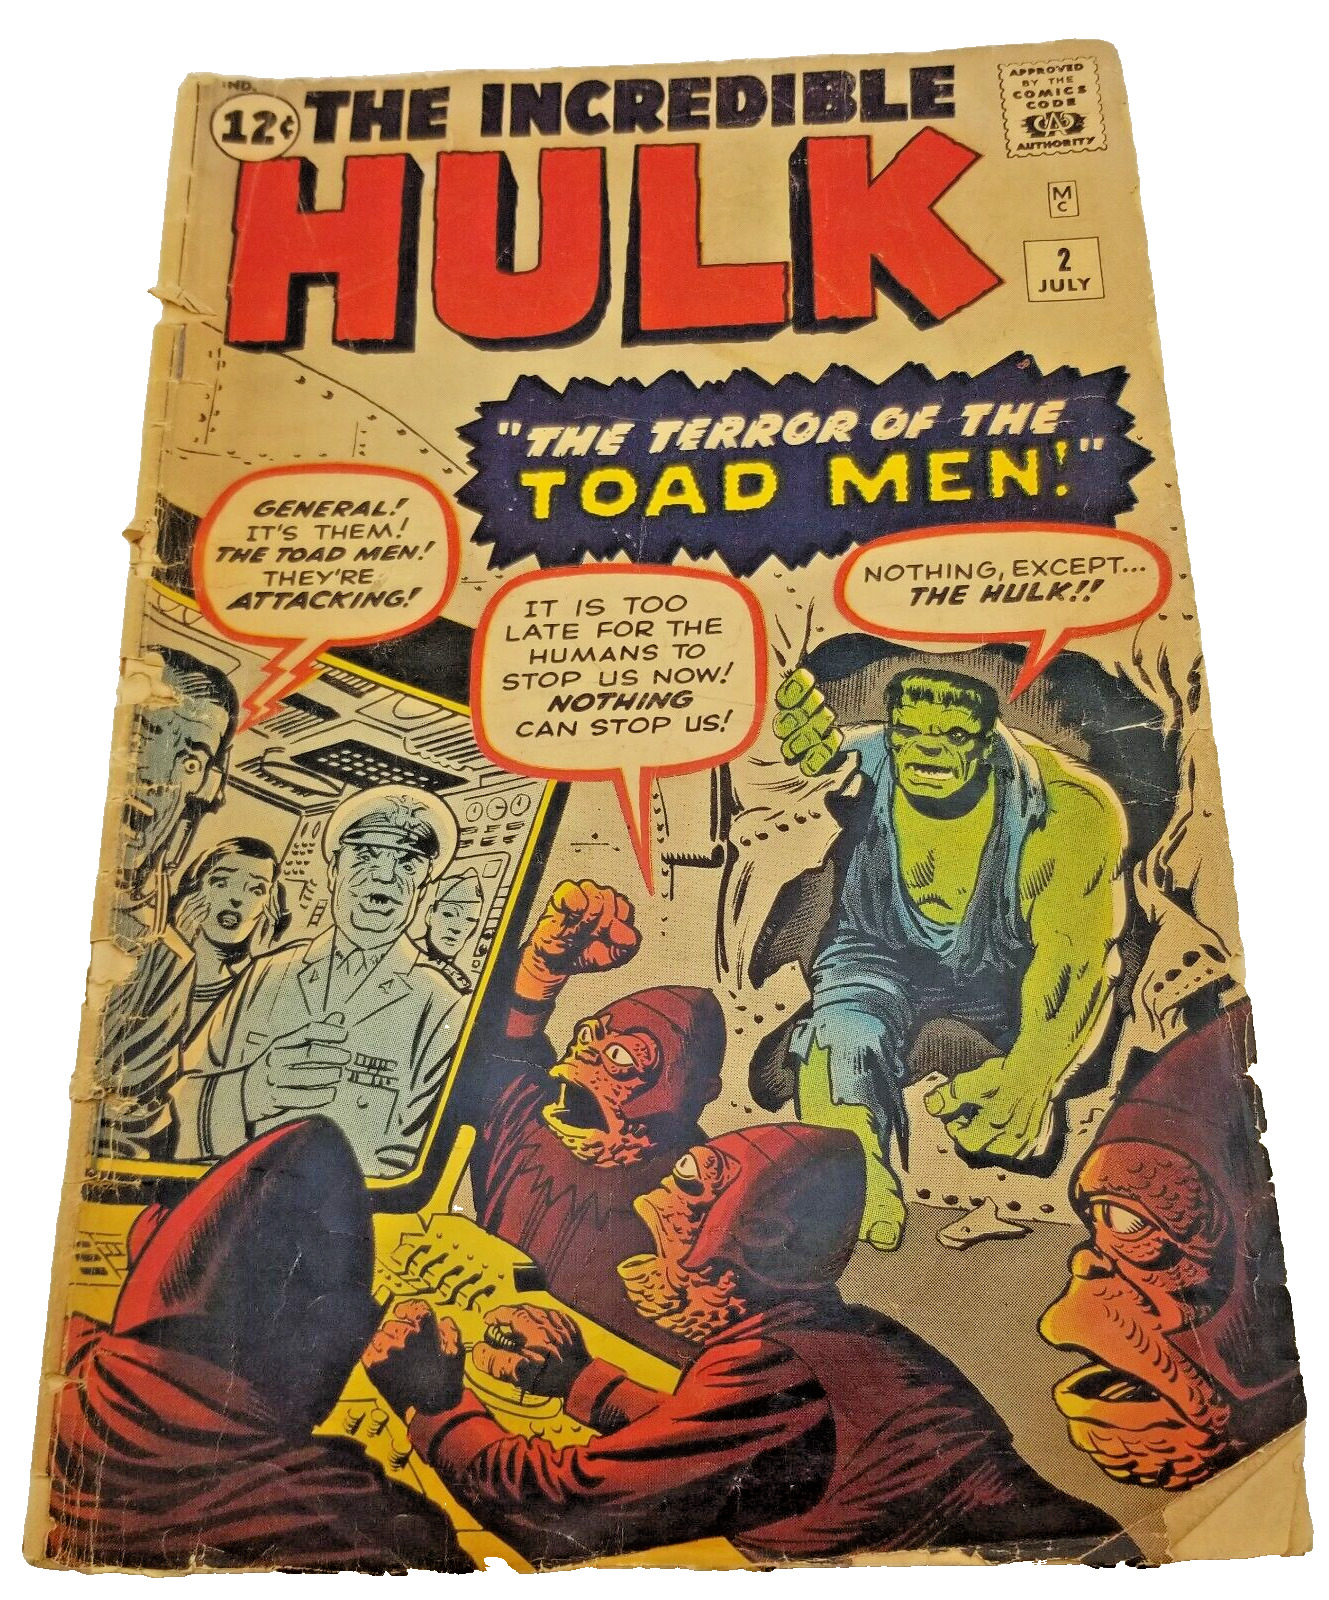 Incredible Hulk #2 COMPLETE and UNRESTORED 1st Green Skin 1962 1st Toad Men